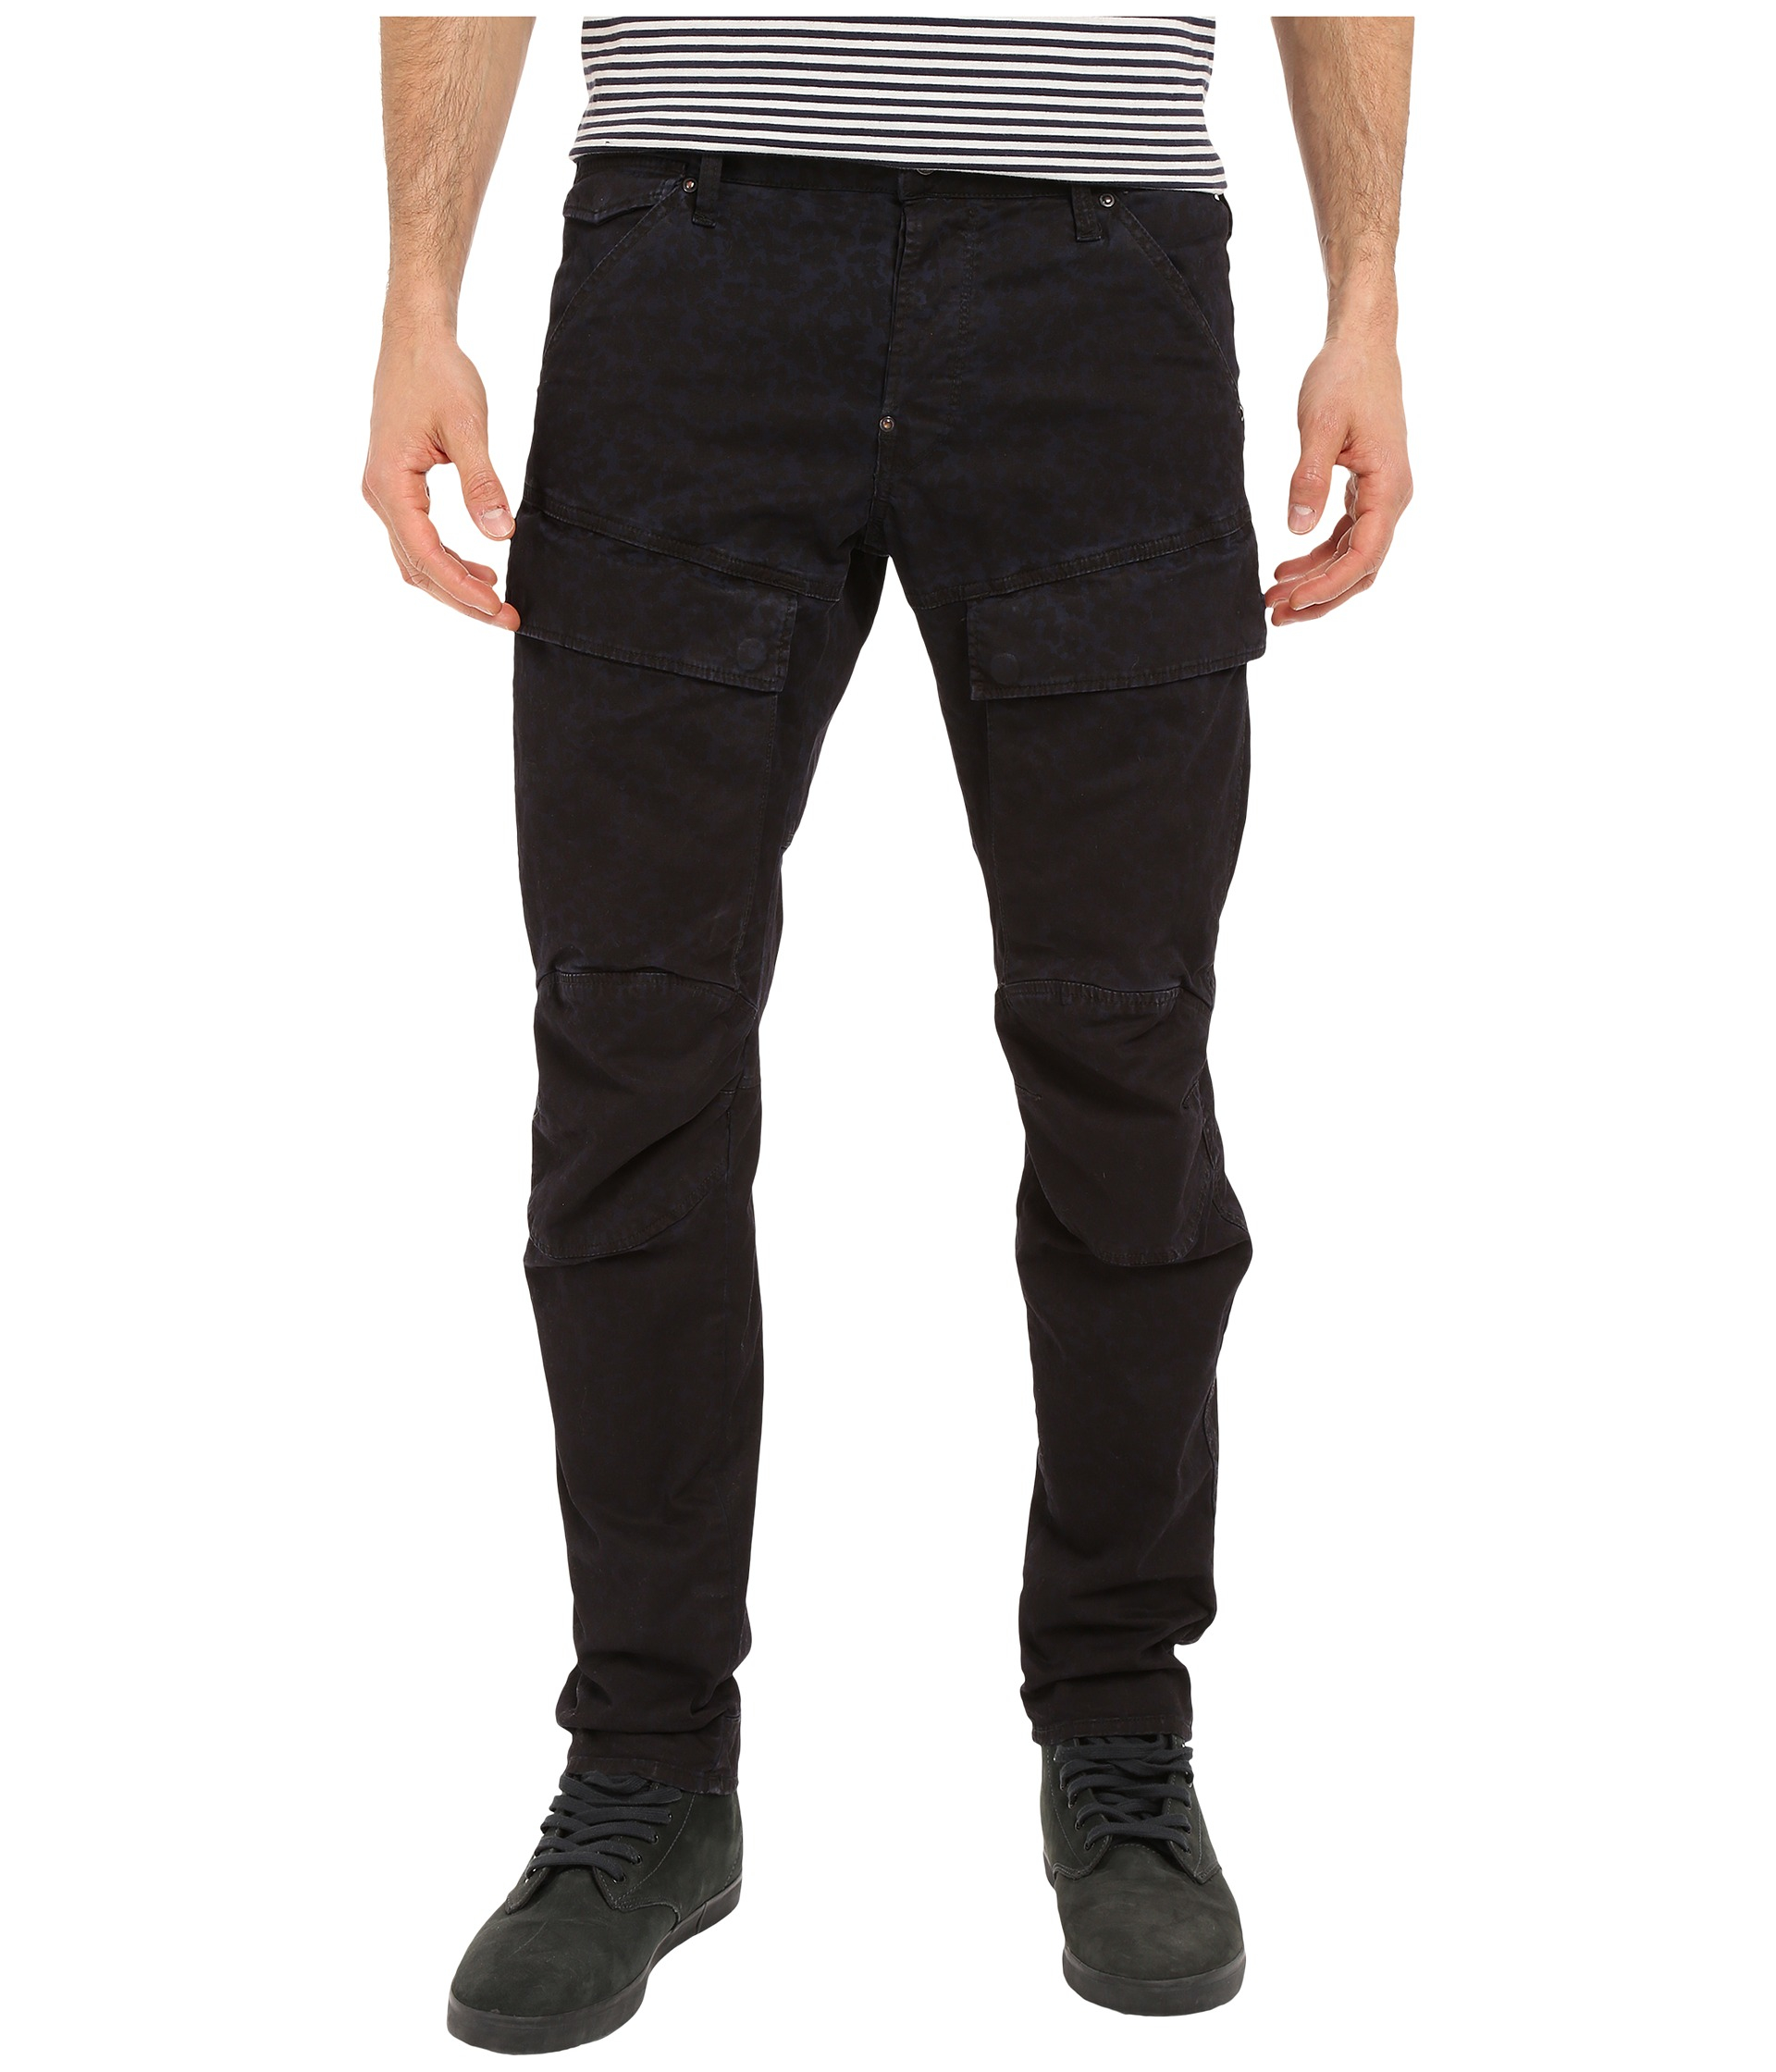 Lyst - G-Star Raw Air Defence 5620 3d Slim in Blue for Men